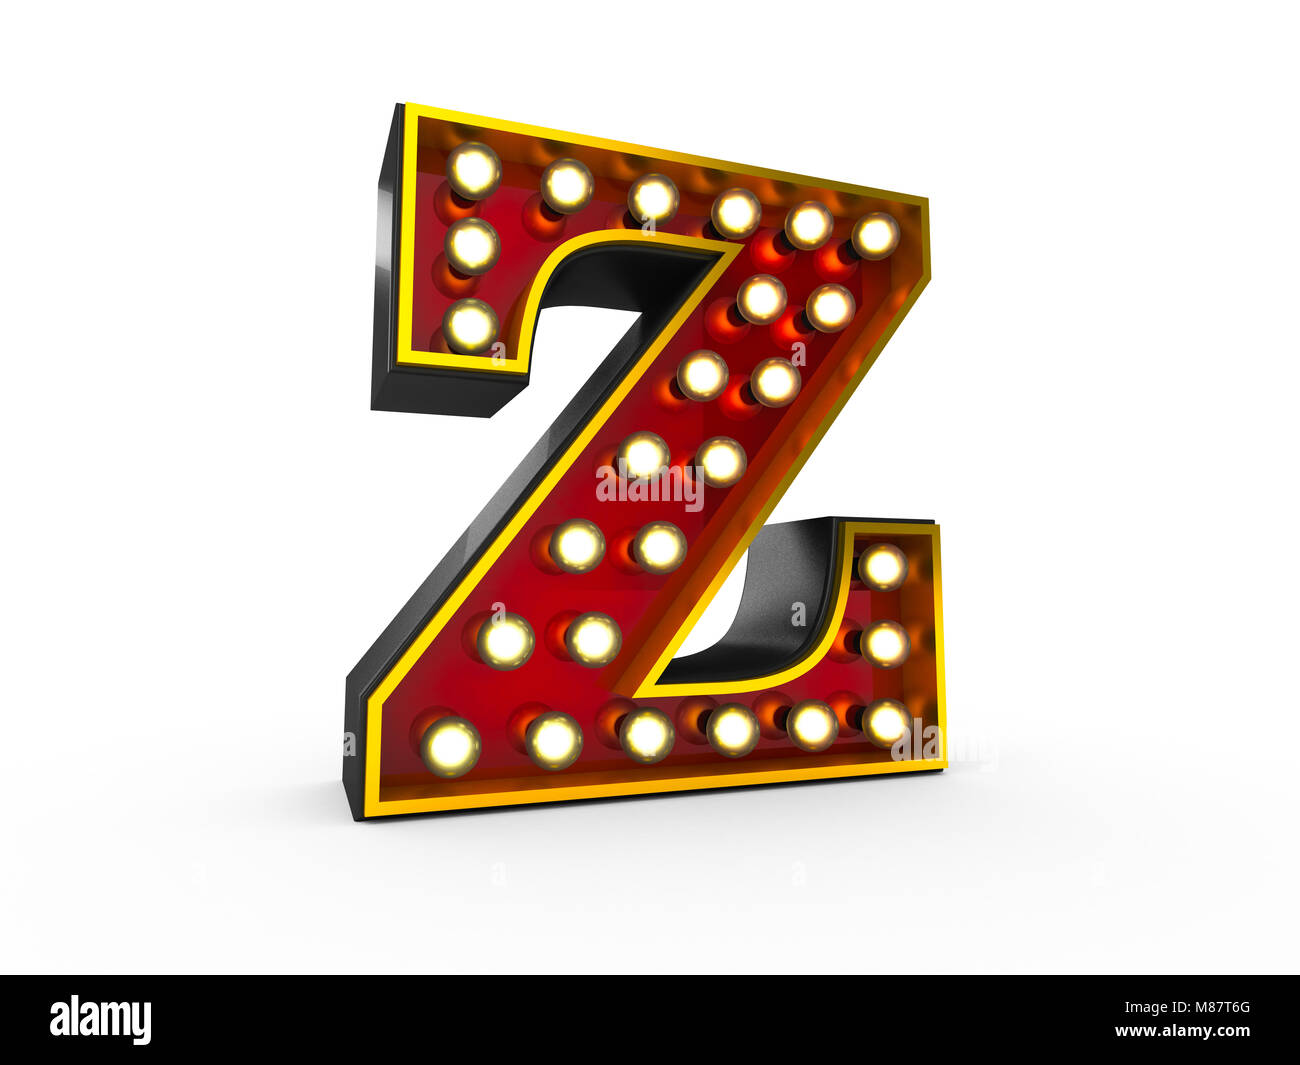 High quality 3D illustration of the letter Z in Broadway style with light bulbs illuminating it over white background Stock Photo